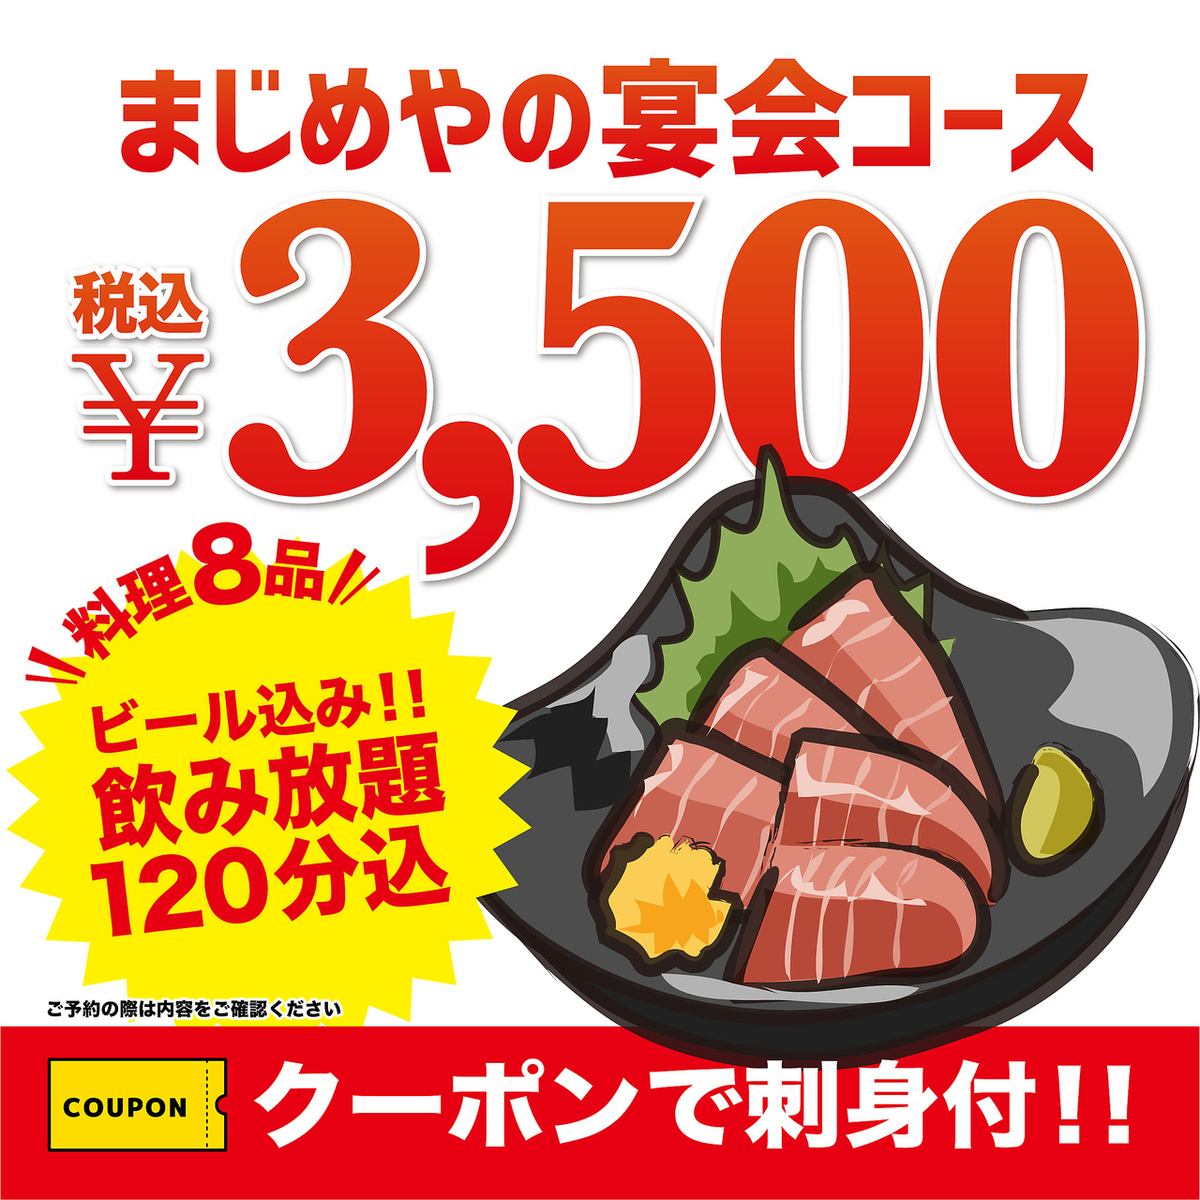 All-you-can-drink beer at Comicomi! Banquet courses at Majimeya start from 3,000 yen (tax included)